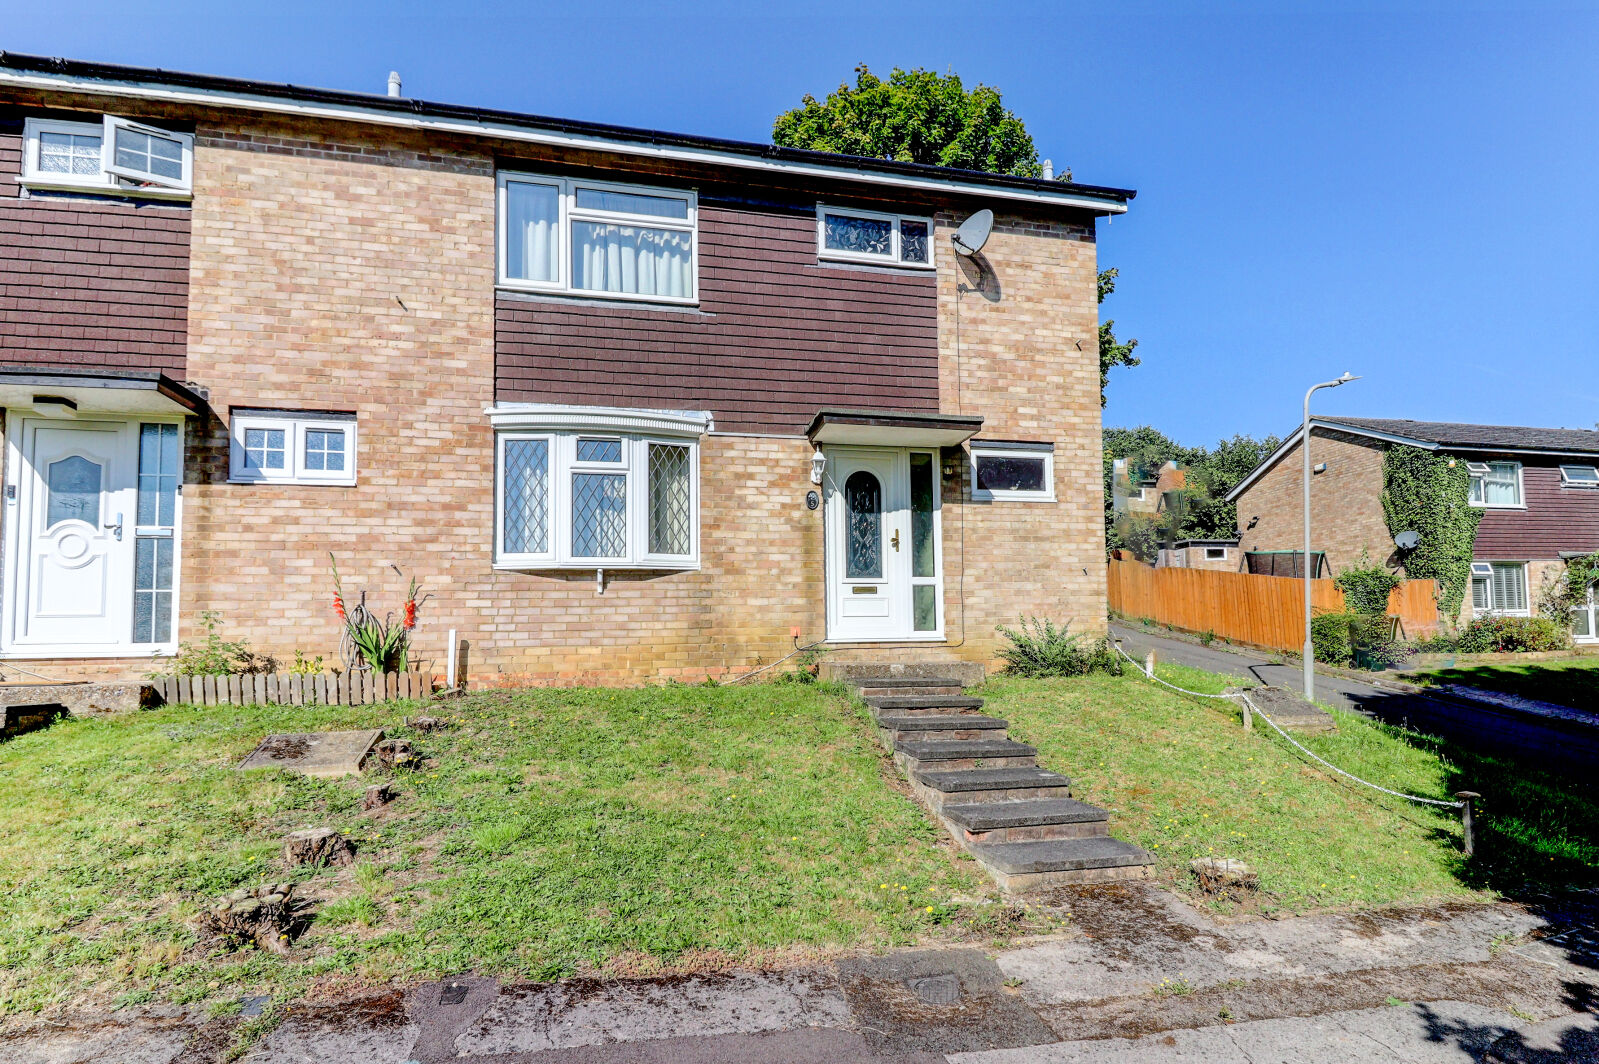 3 bedroom end terraced house for sale Edmunds Close, High Wycombe, HP12, main image